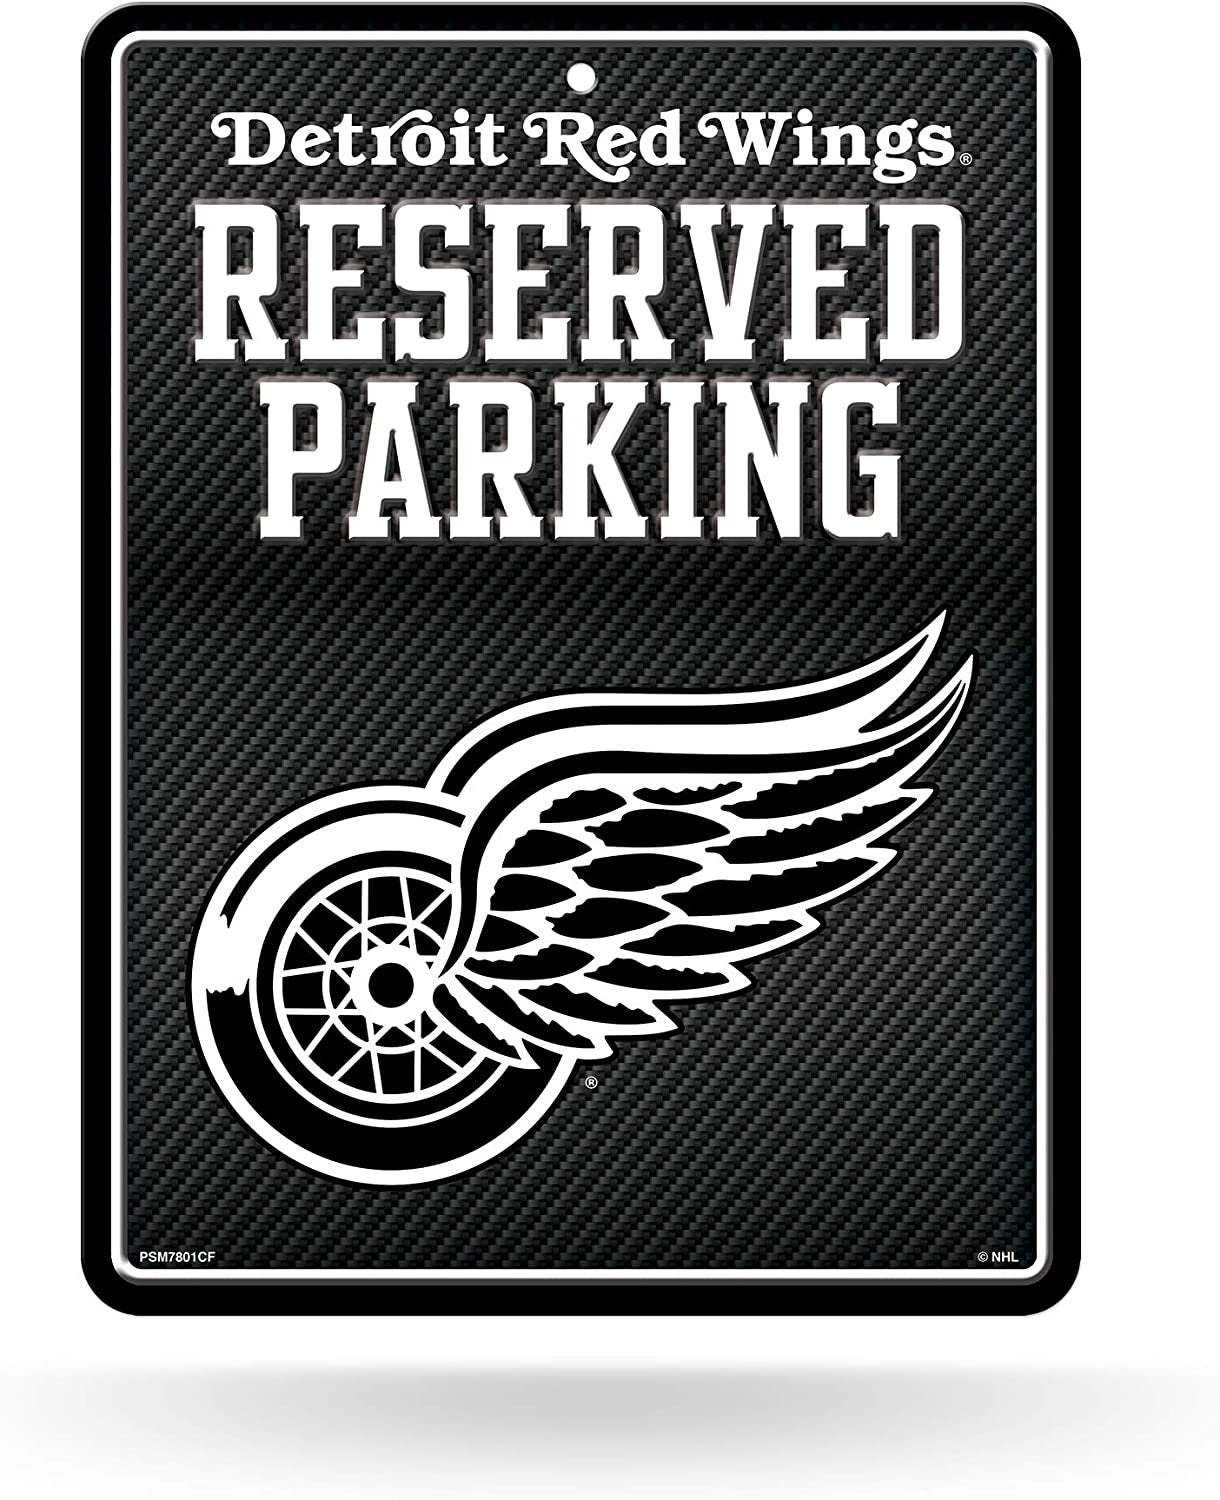 Detroit Red Wings Metal Parking Novelty Wall Sign 8.5 x 11 Inch Carbon Fiber Design